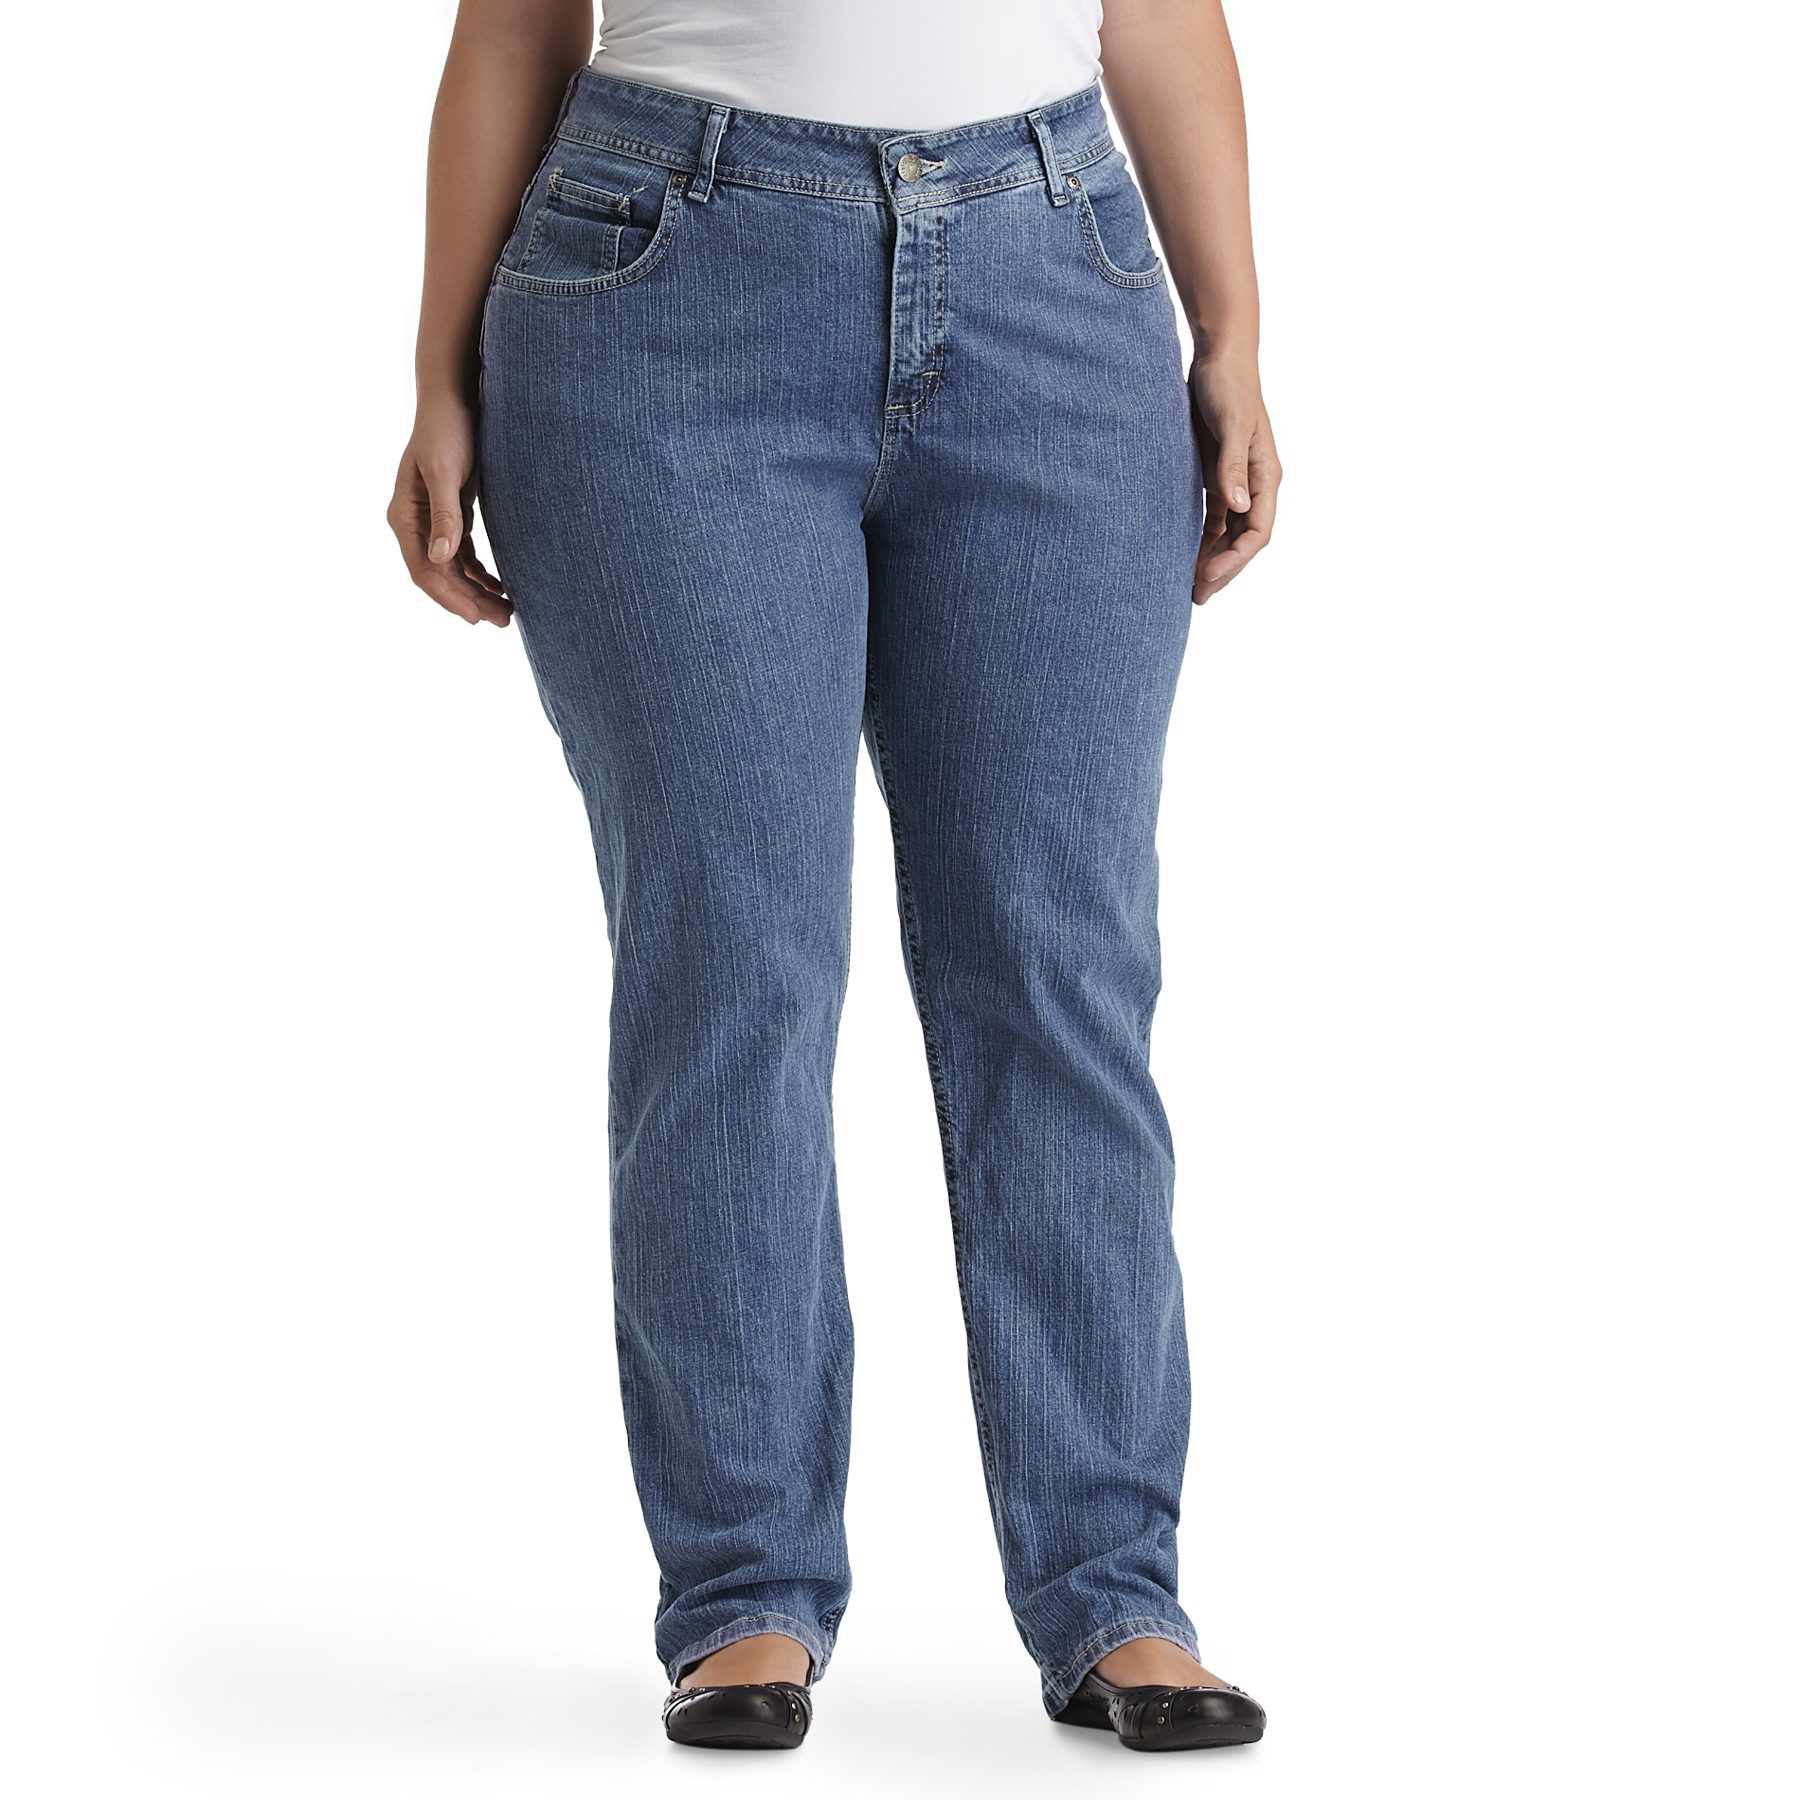 Riders by Lee Women's Plus 5 Pocket Relaxed Fit Jean